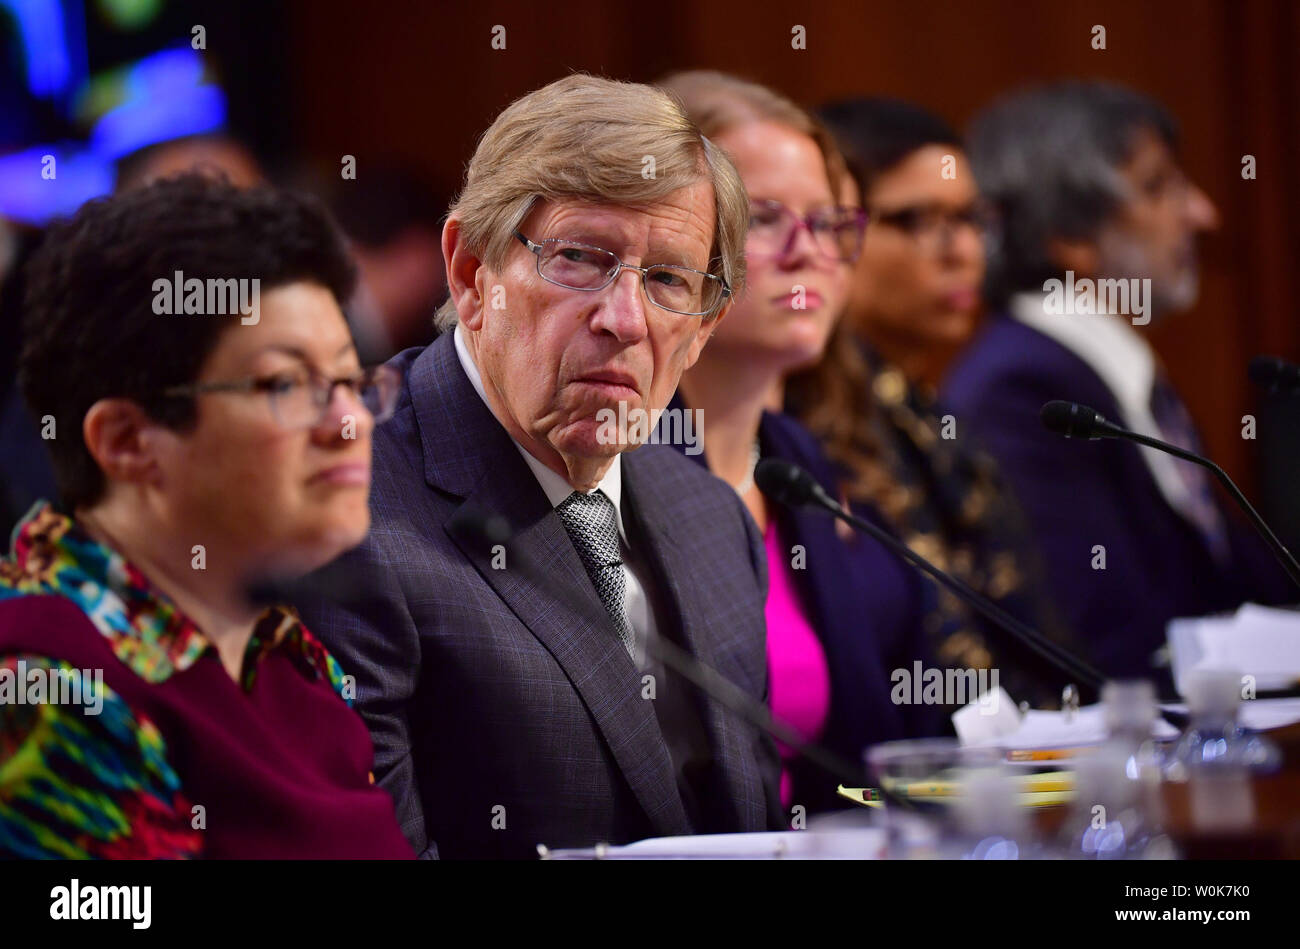 Theodore Olson (2nd-L), former Solicitor General testifies about Supreme Court Justice nominee Brett M. Kavanaugh during the final day of Kavanaugh's confirmation hearing, on Capitol Hill in Washington, DC on September 7, 2018. Judge Kavanaugh was nominated to fill the seat of Justice Anthony M. Kennedy who announced his retirement in June. Photo by Kevin Dietsch/UPI Stock Photo